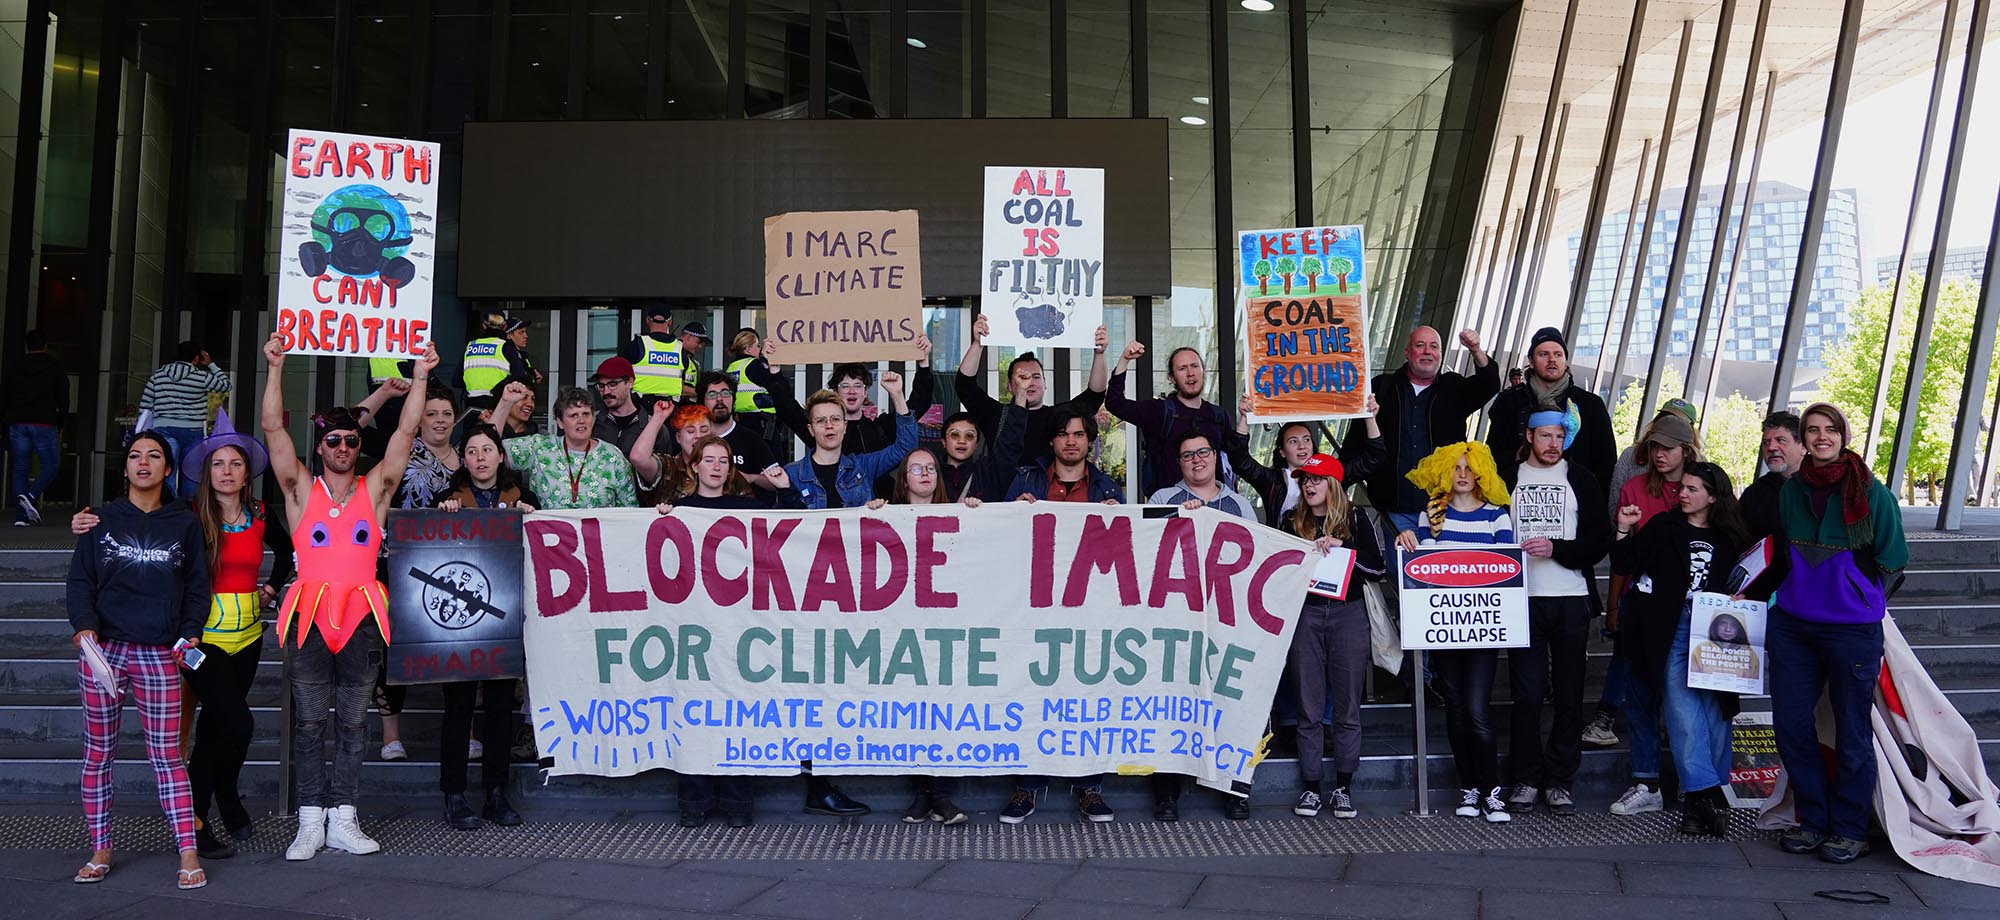 Group of Protestors standing in front of the Exhibition Centre behind a large banner that reads "Blockade IMARC"